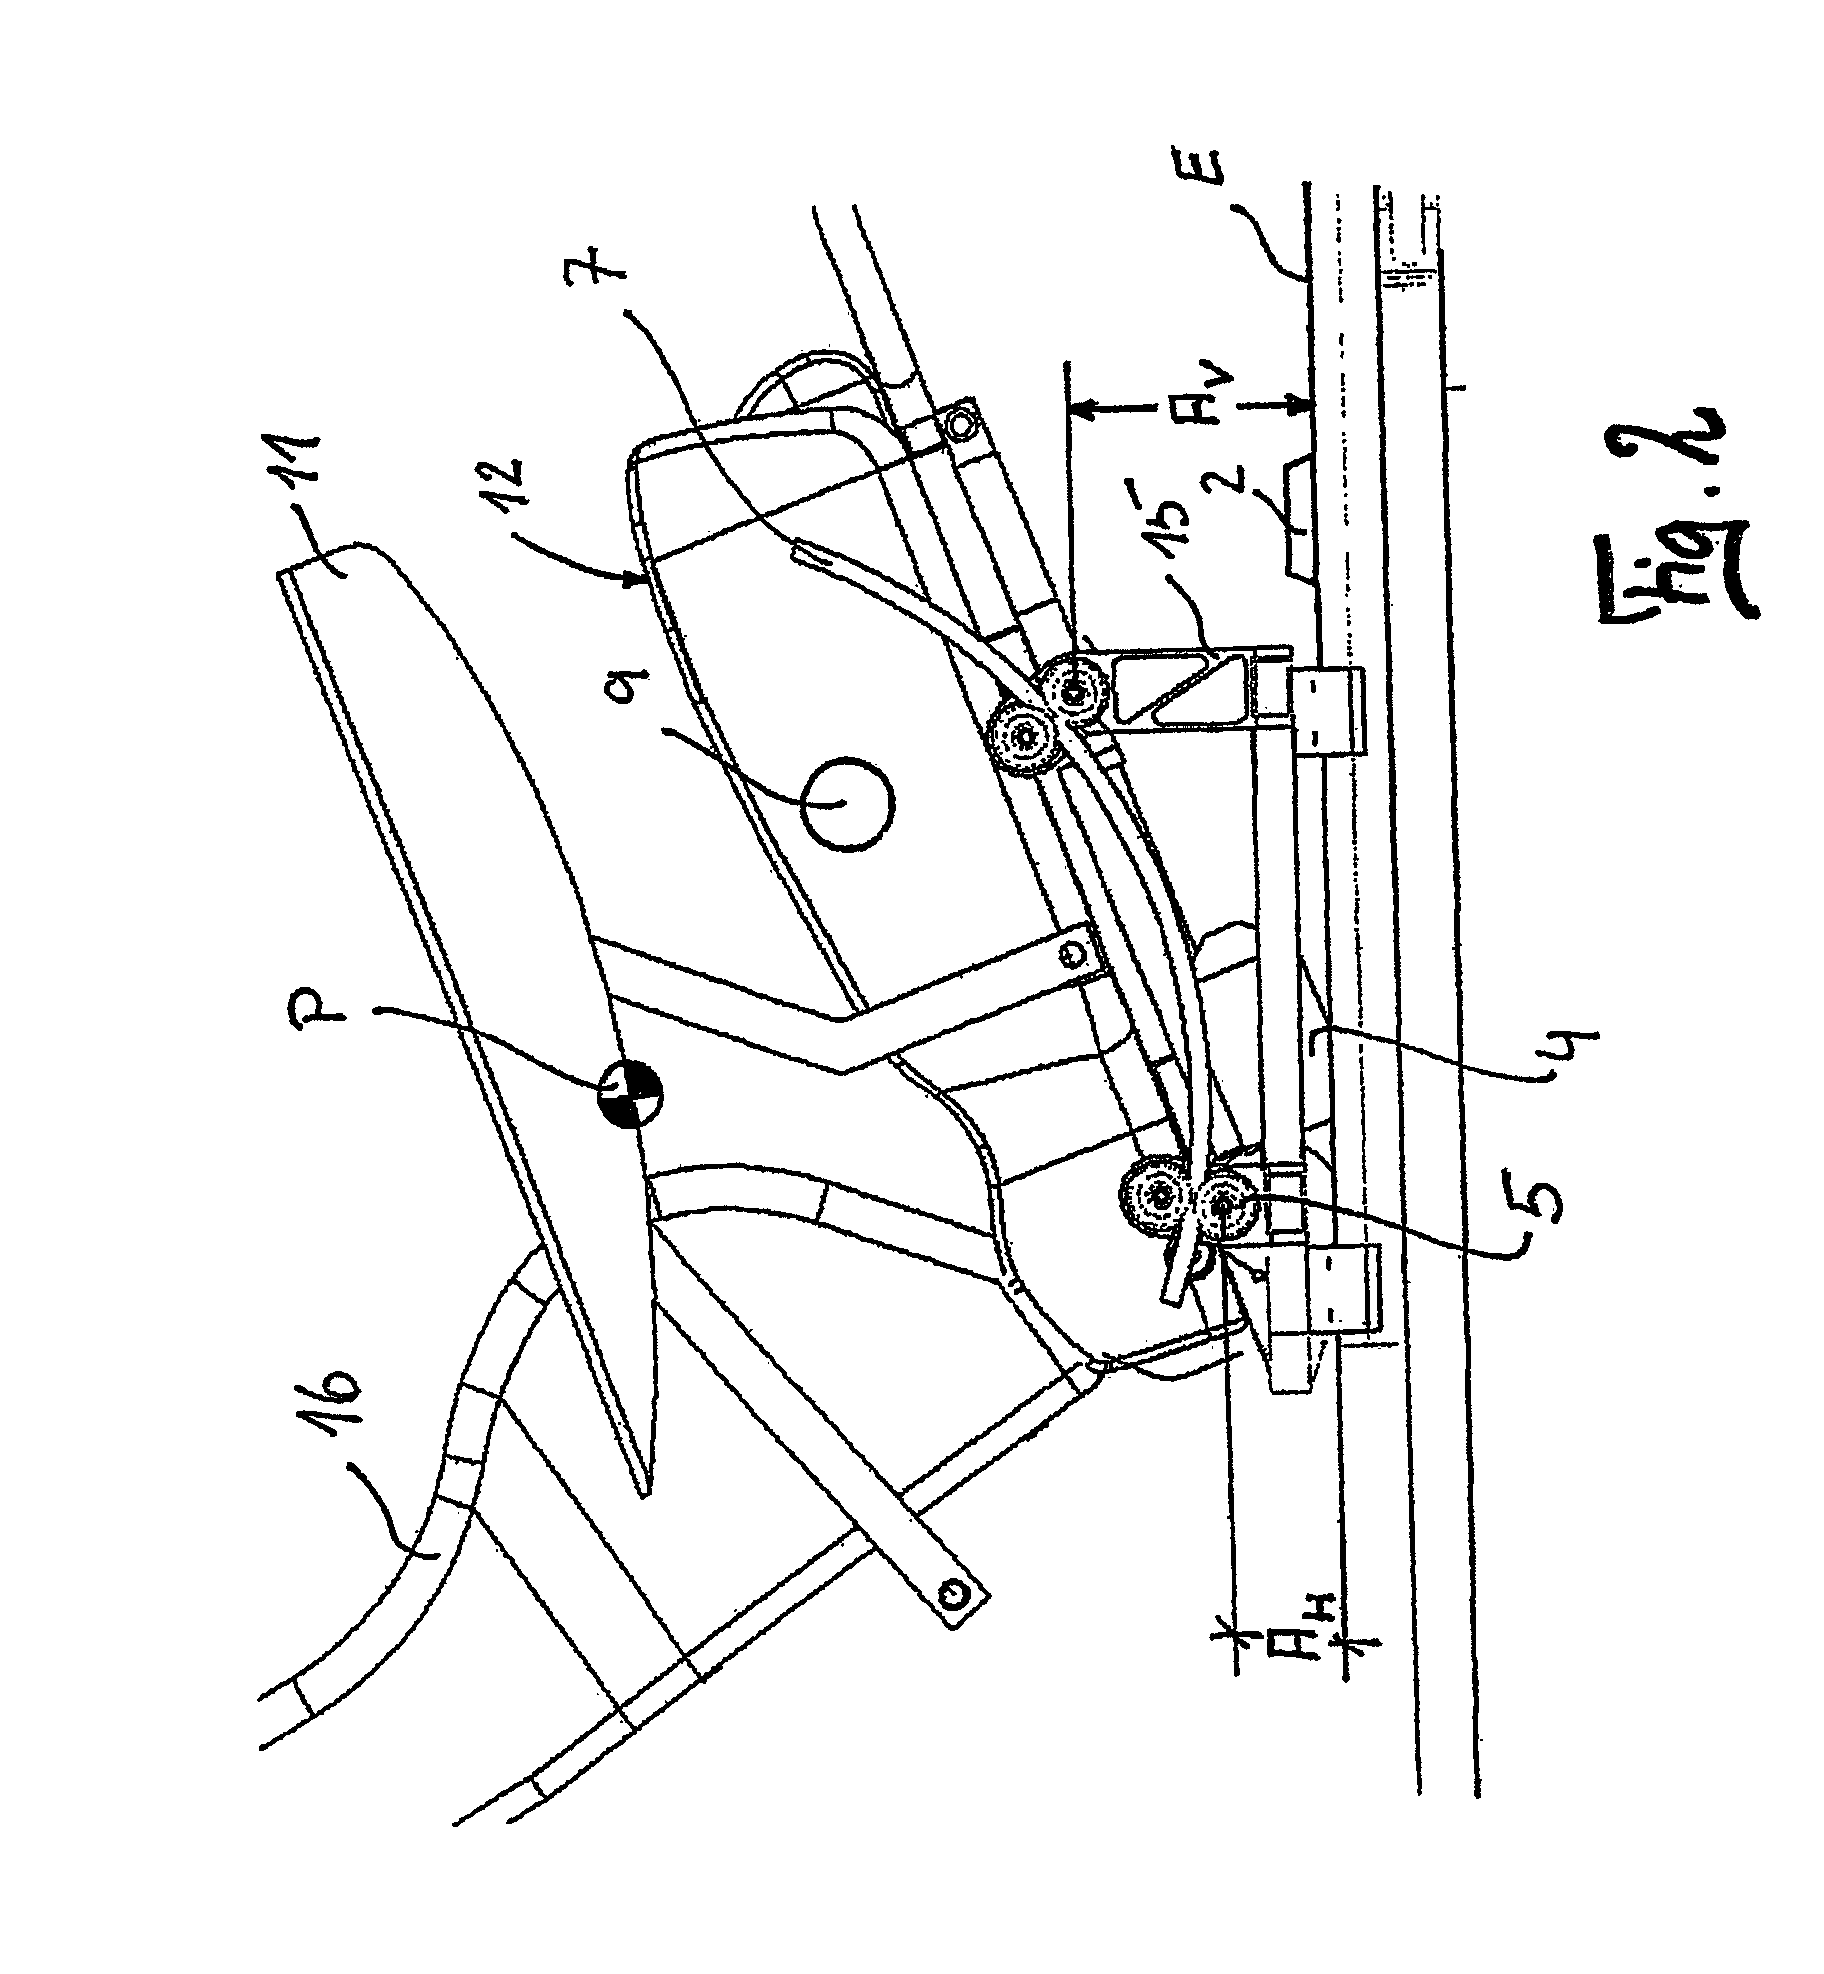 Vehicle with driver's seat with adjustable inclination